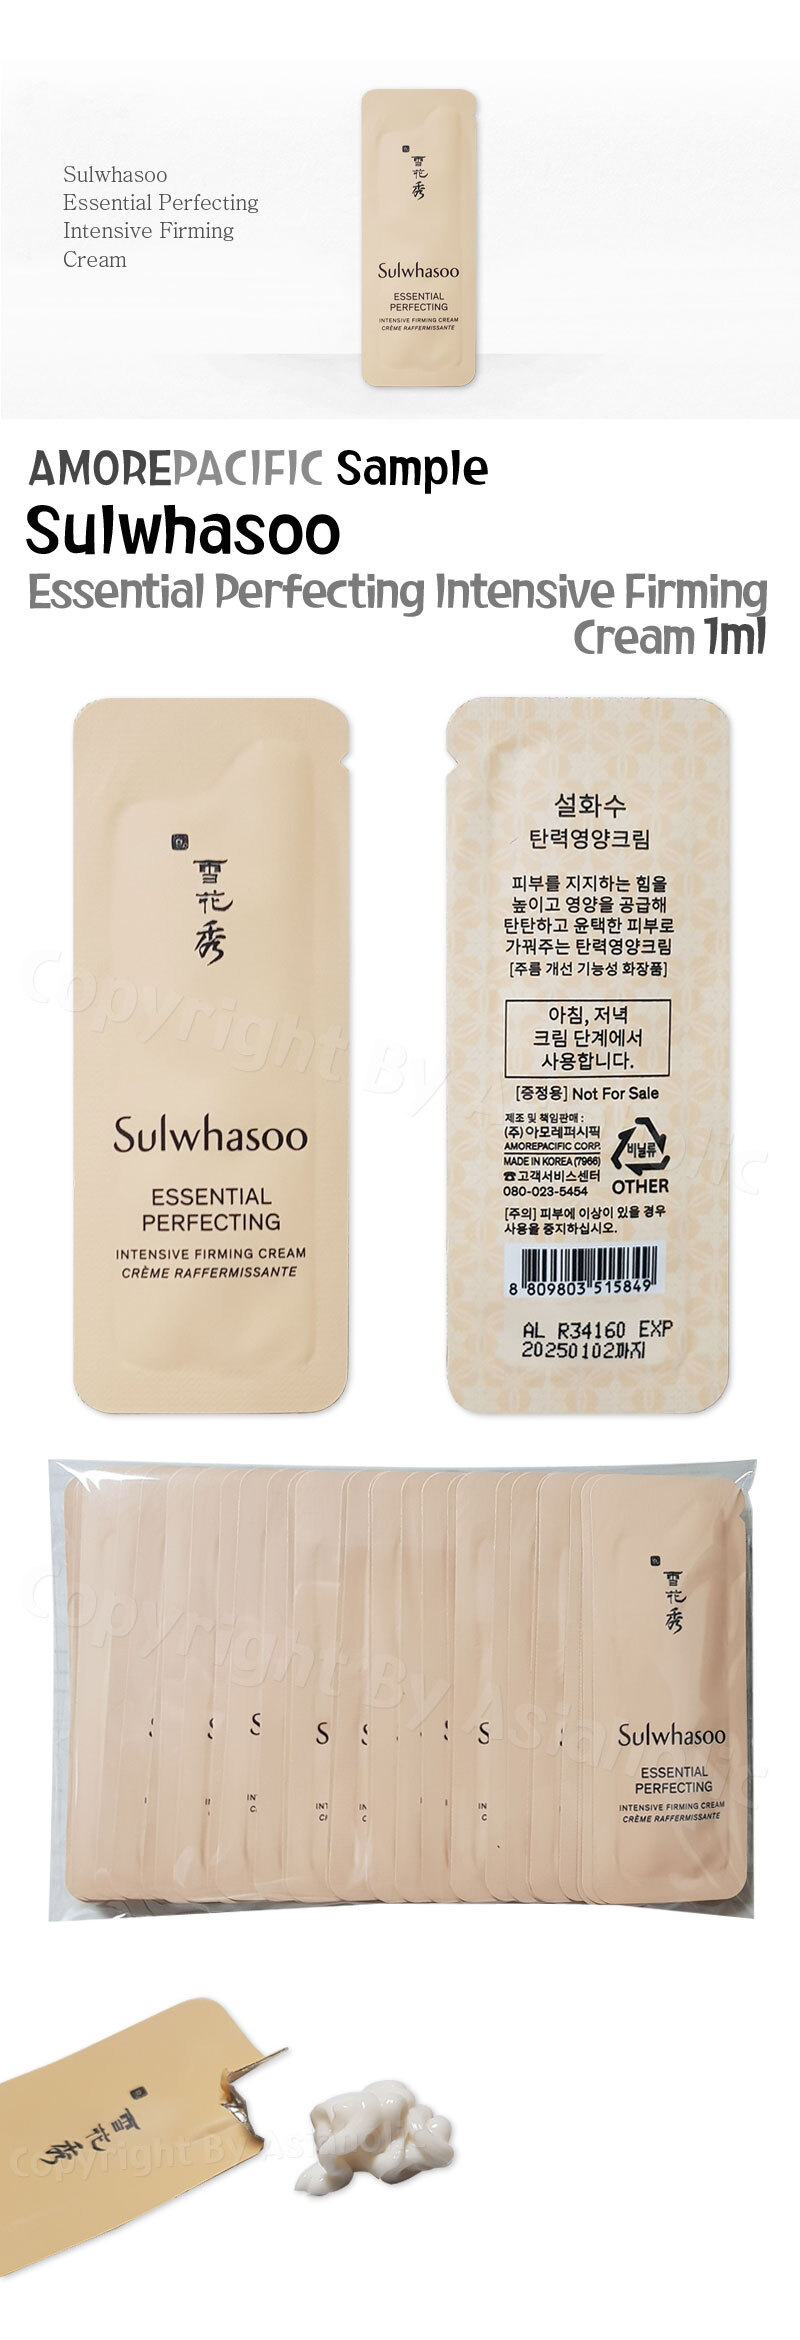 Sulwhasoo Essential Perfecting Intensive Firming Cream 1ml (10pcs ~ 130pcs) Sample Newest Version